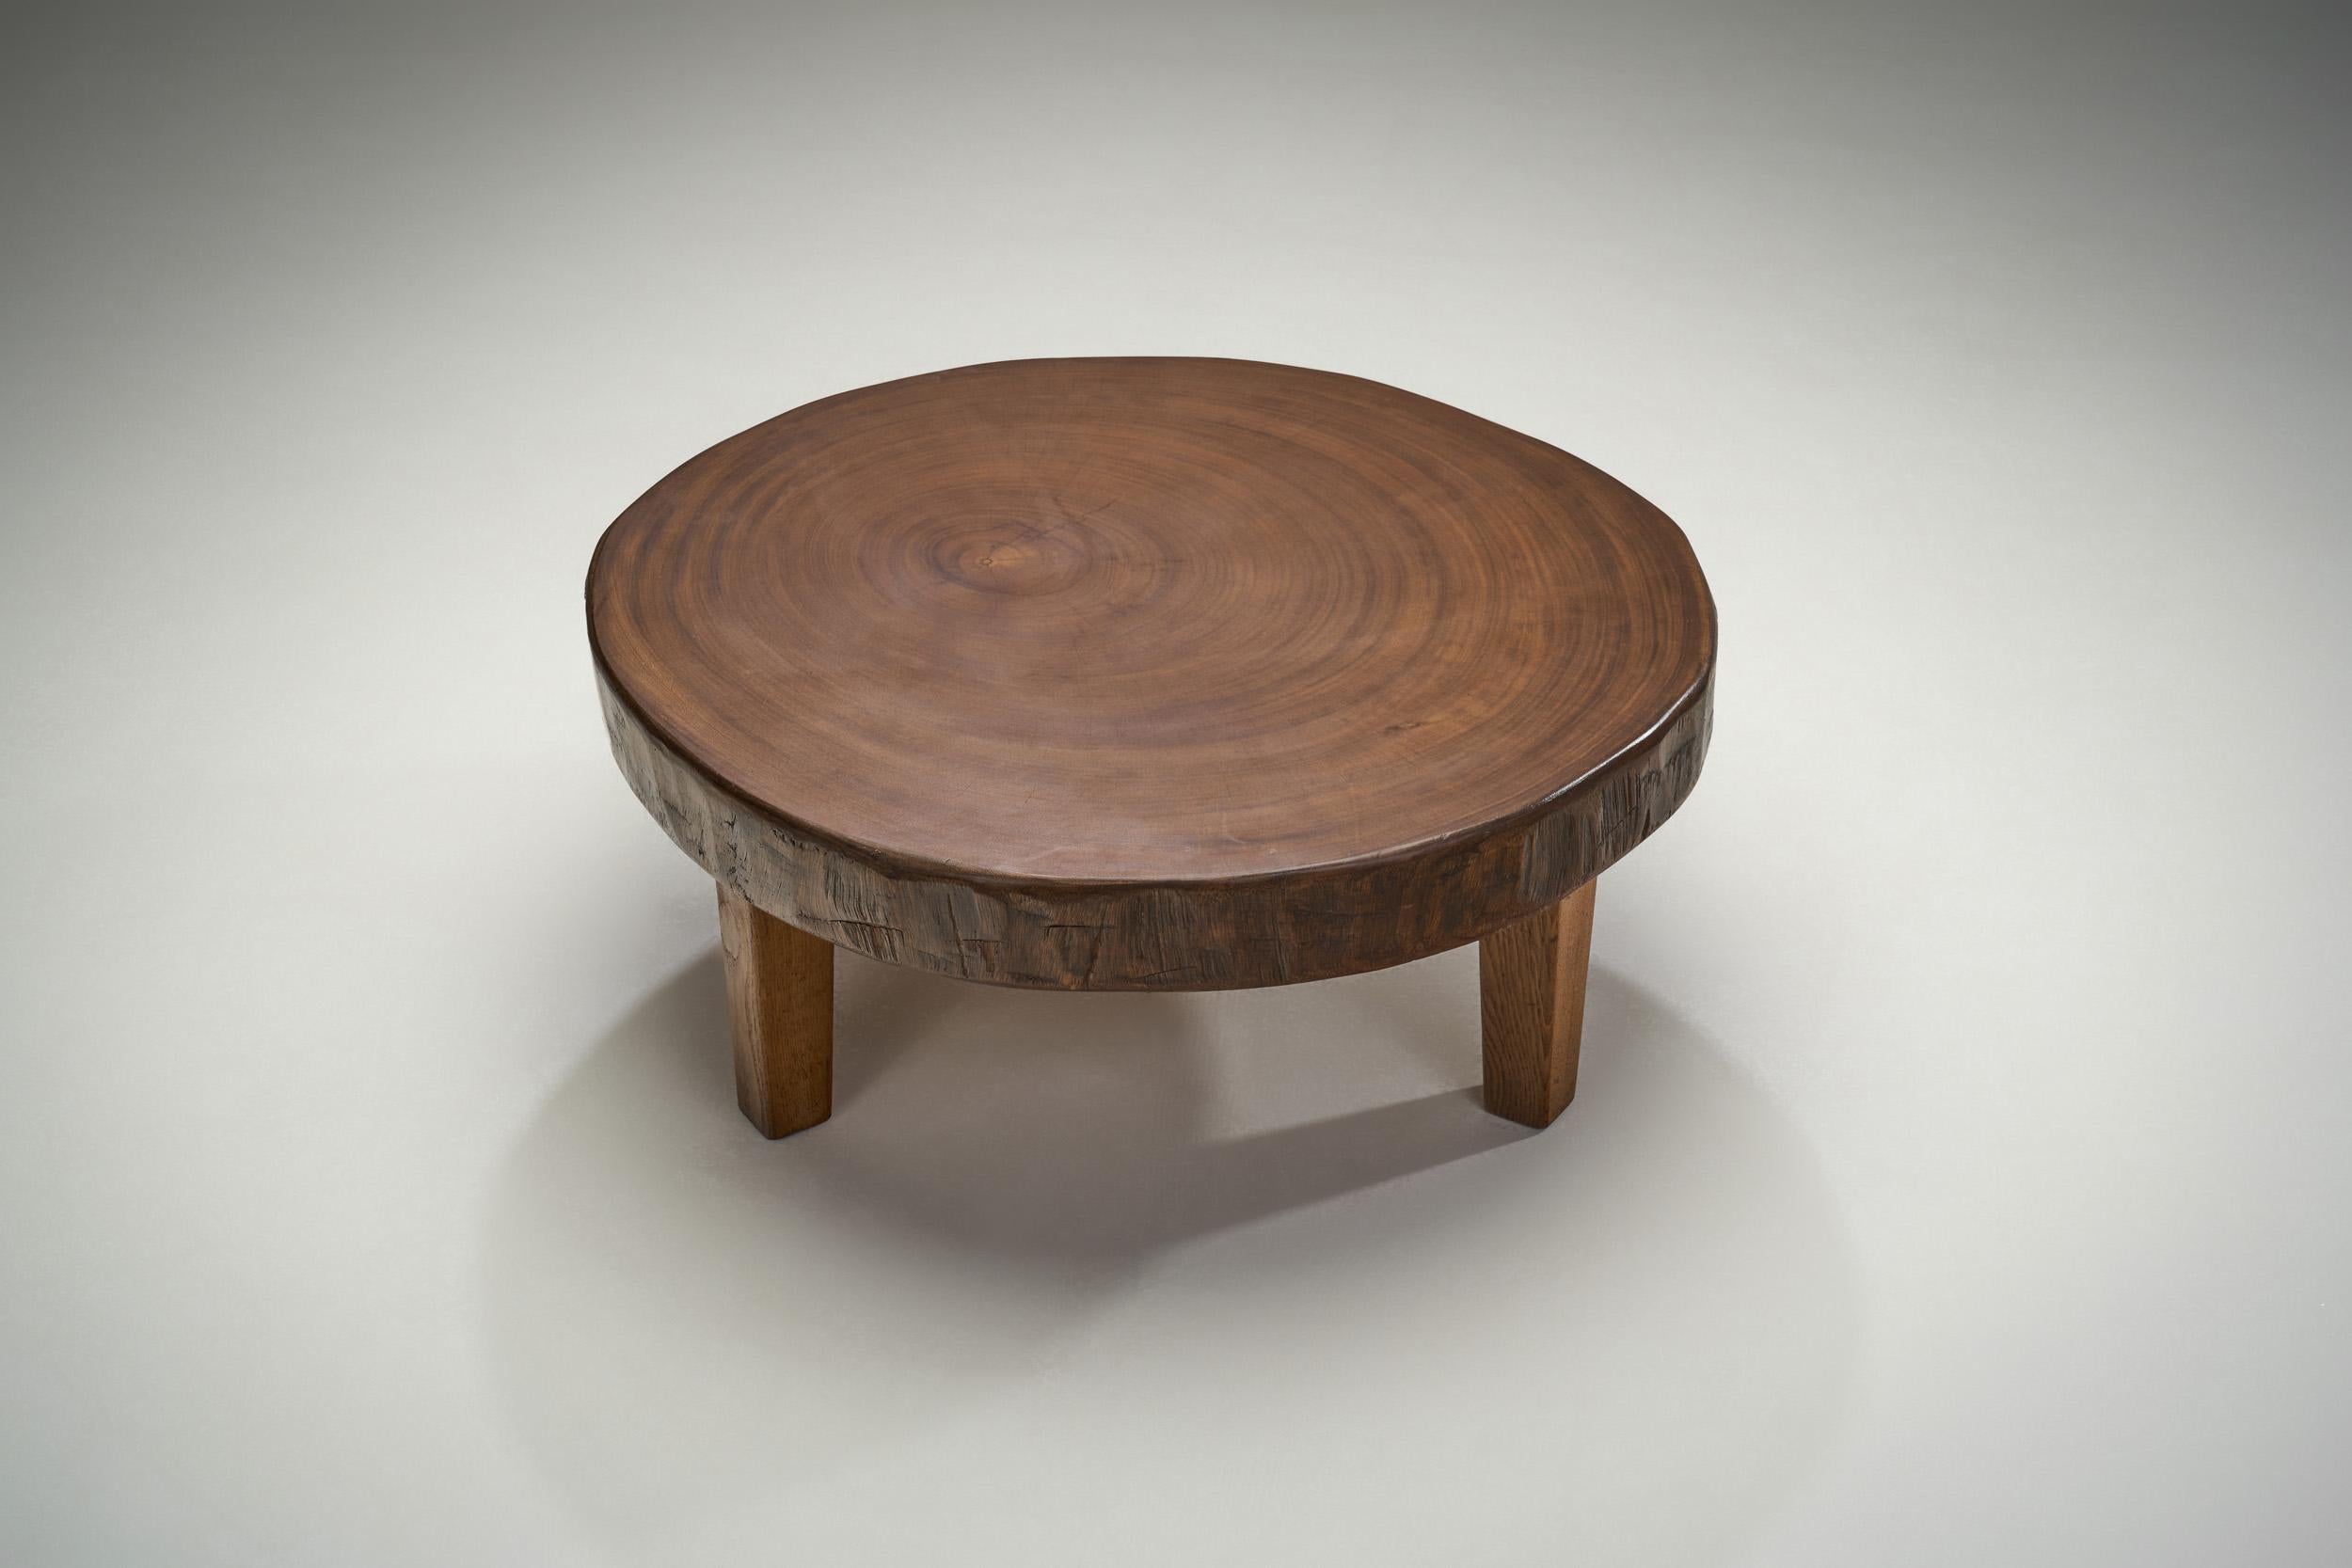 Mid-20th Century Midcentury Rustic Solid Wood Coffee Table, Europe, circa 1950s For Sale